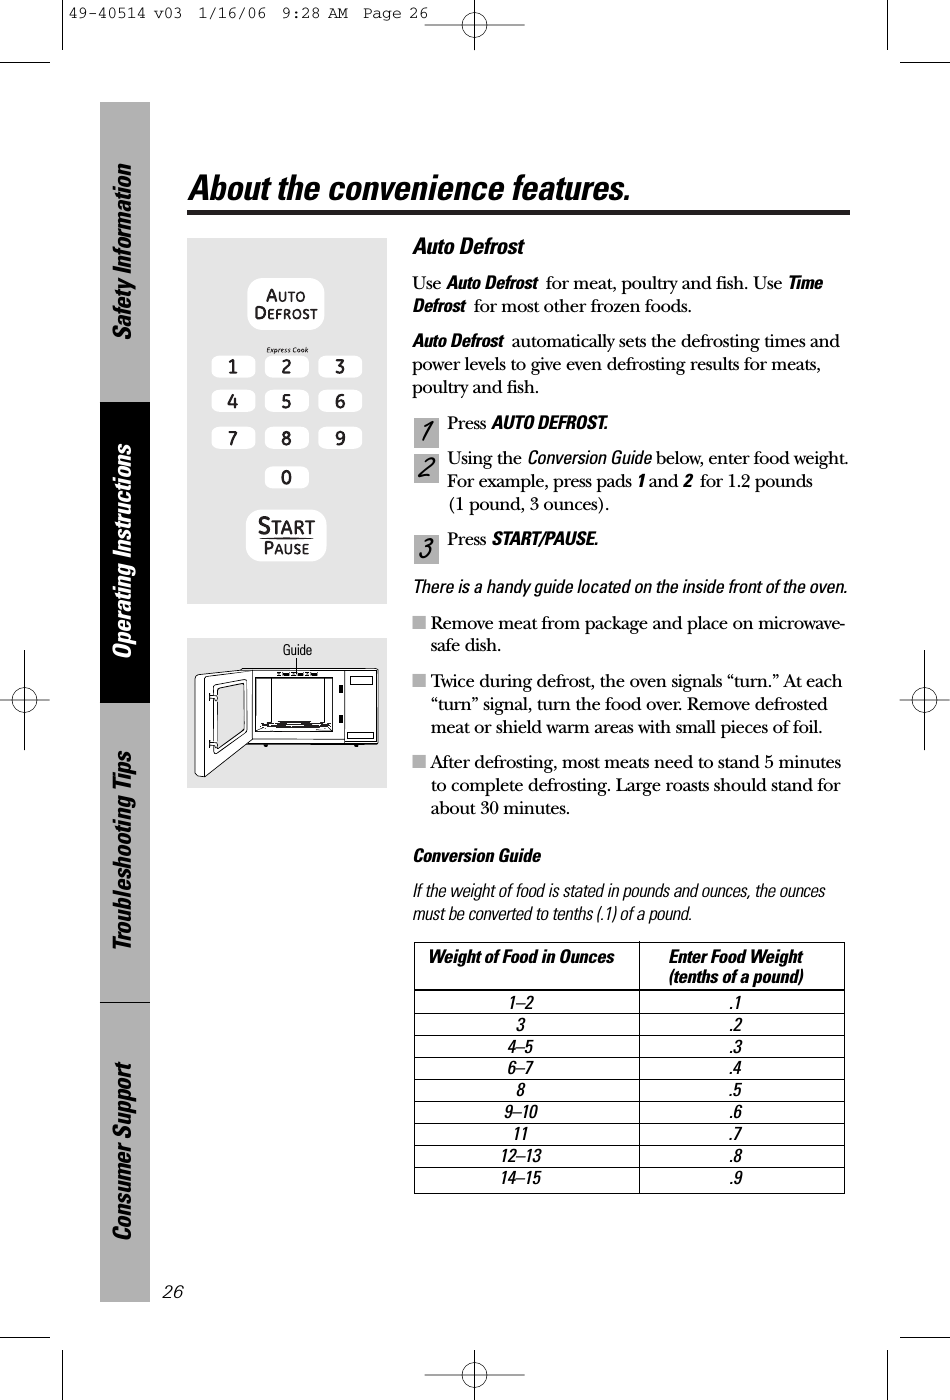 Safety InformationOperating InstructionsTroubleshooting TipsConsumer SupportAbout the convenience features.26Auto DefrostUse Auto Defrost for meat, poultry and fish. Use TimeDefrost for most other frozen foods.Auto Defrost automatically sets the defrosting times andpower levels to give even defrosting results for meats,poultry and fish.Press AUTO DEFROST.Using the Conversion Guide below, enter food weight.For example, press pads 1and 2for 1.2 pounds (1 pound, 3 ounces).Press START/PAUSE.There is a handy guide located on the inside front of the oven. ■Remove meat from package and place on microwave-safe dish.■Twice during defrost, the oven signals “turn.” At each“turn” signal, turn the food over. Remove defrostedmeat or shield warm areas with small pieces of foil.■After defrosting, most meats need to stand 5 minutesto complete defrosting. Large roasts should stand forabout 30 minutes.Conversion GuideIf the weight of food is stated in pounds and ounces, the ouncesmust be converted to tenths (.1) of a pound.Weight of Food in Ounces Enter Food Weight(tenths of a pound)1–2 .13.24–5 .36–7 .48.59–10 .611 .712–13 .814–15 .9321Guide49-40514 v03  1/16/06  9:28 AM  Page 26